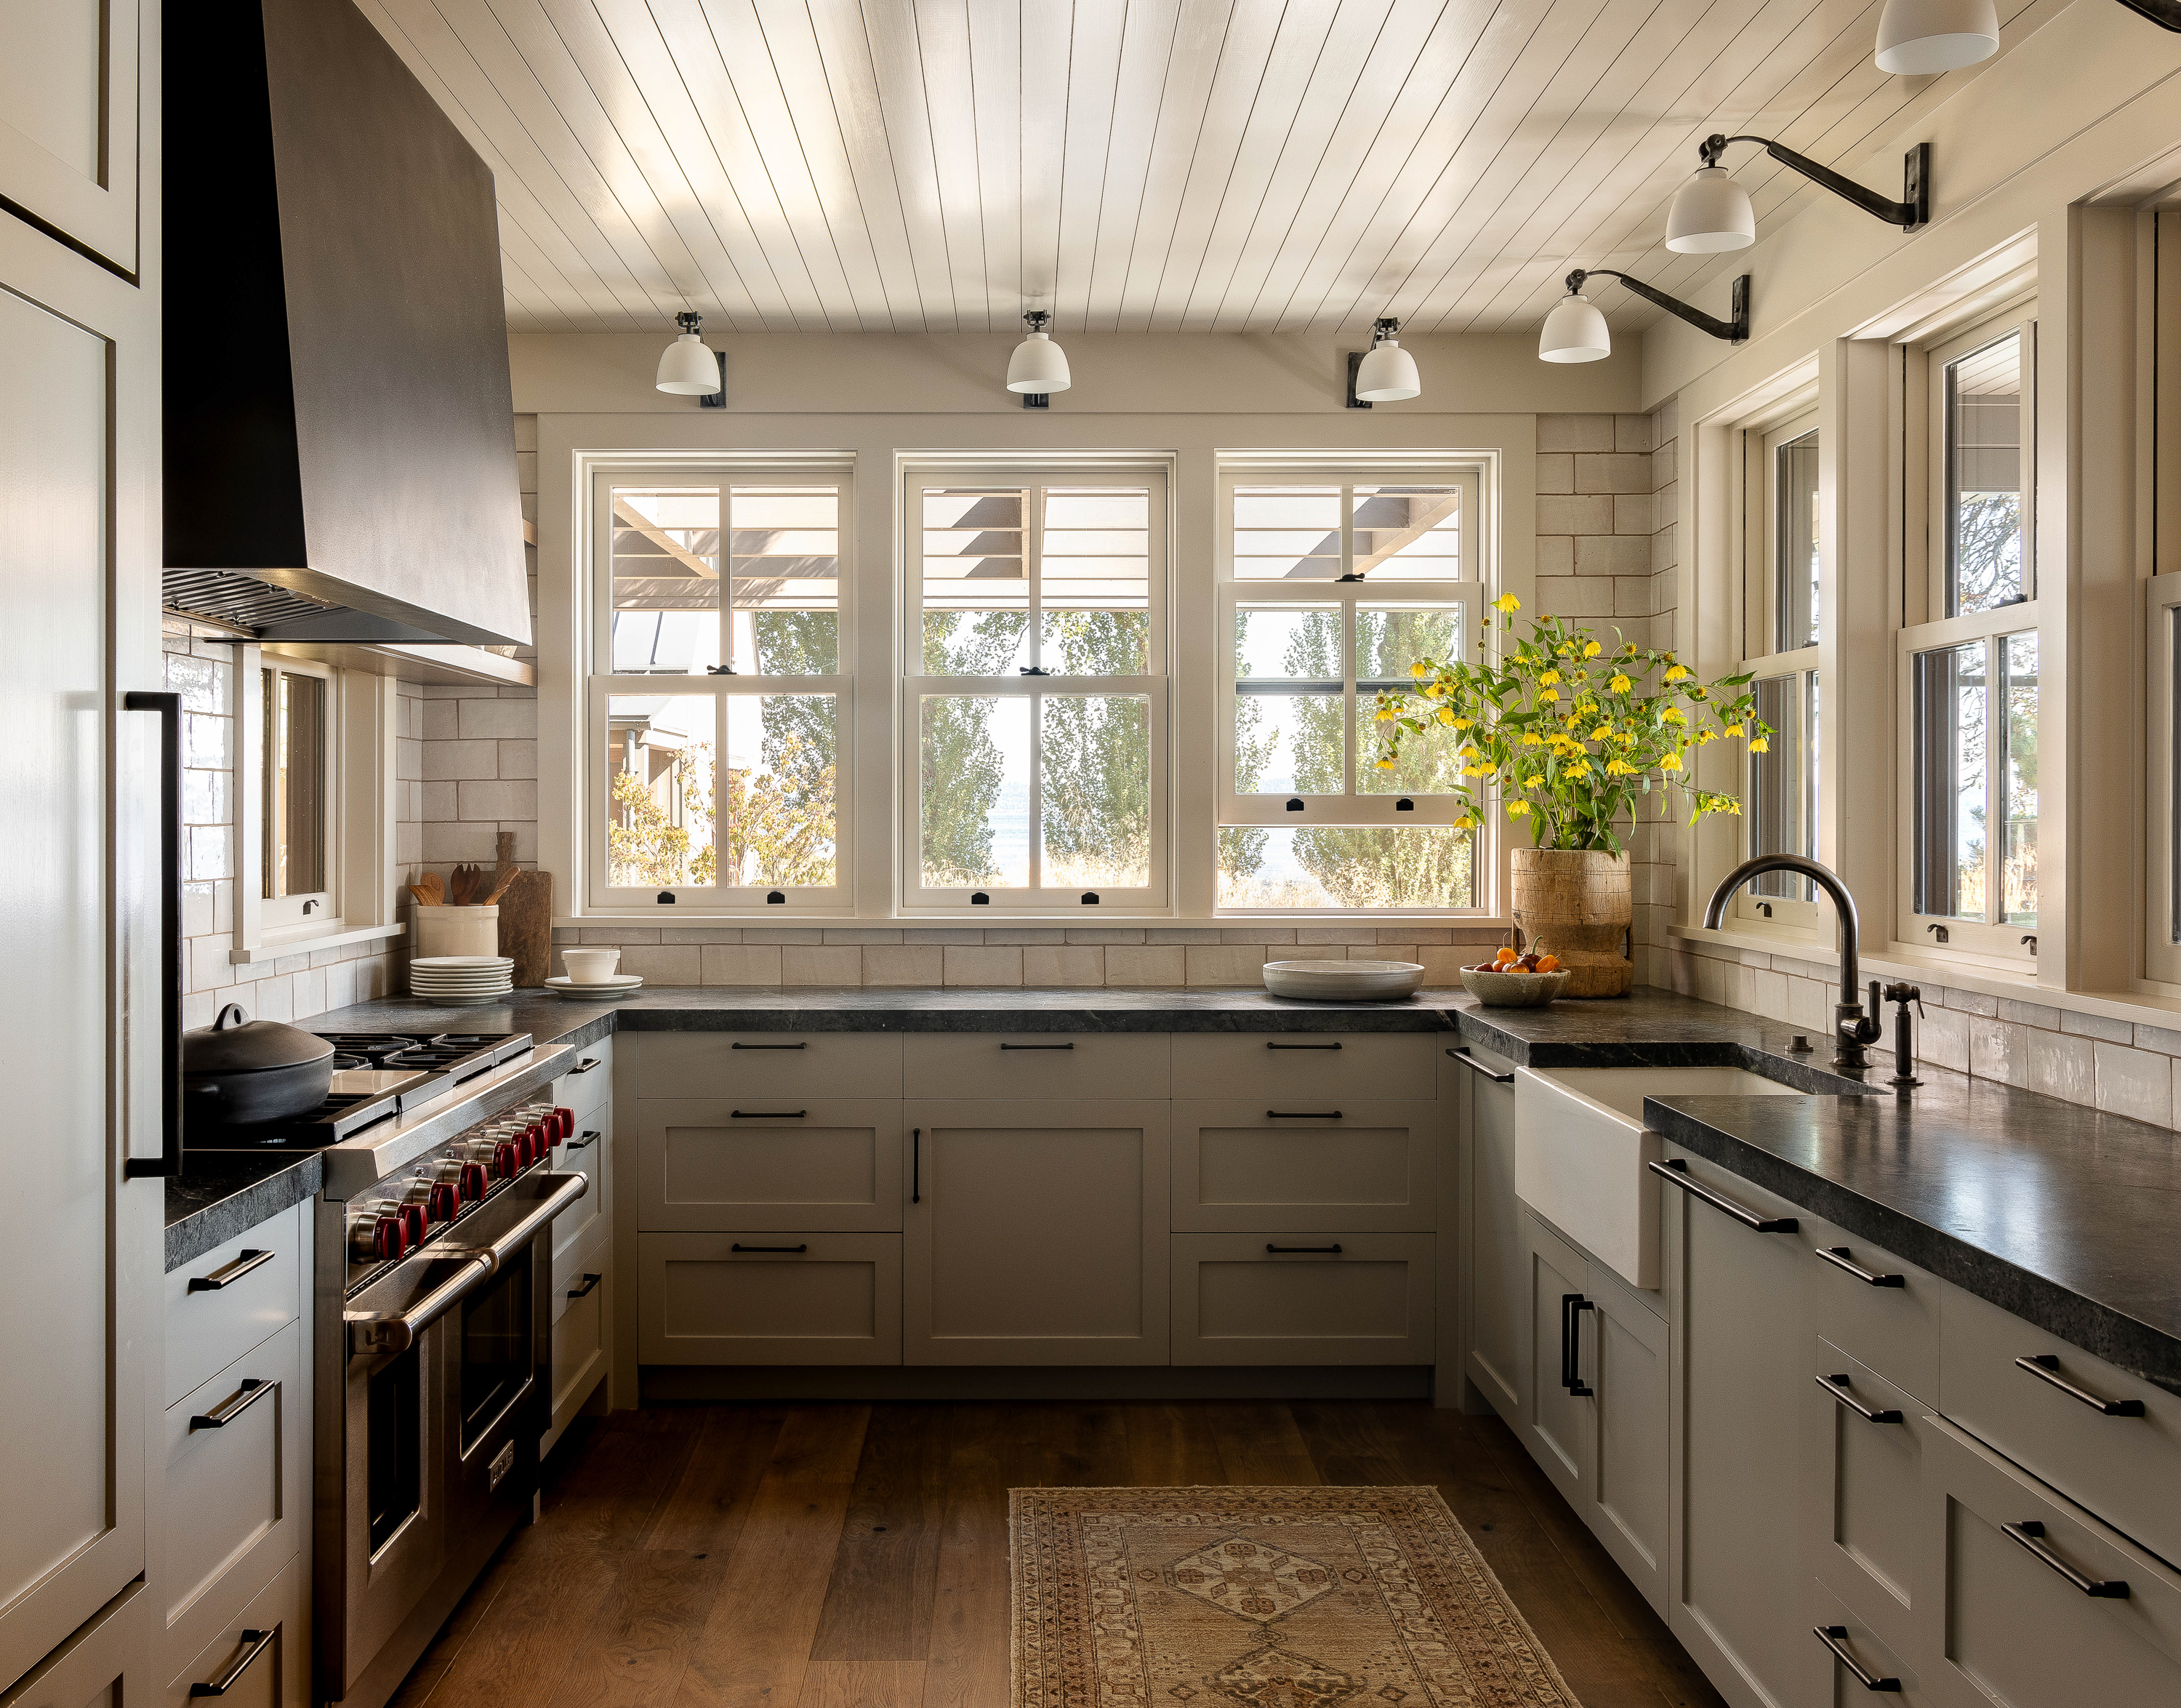 The kitchen is adorned with soapstone countertops, brass and bronze fittings, and double-hung windows that offer easy cross ventilation, creating a perfect blend of beach house and farm kitchen vibes.